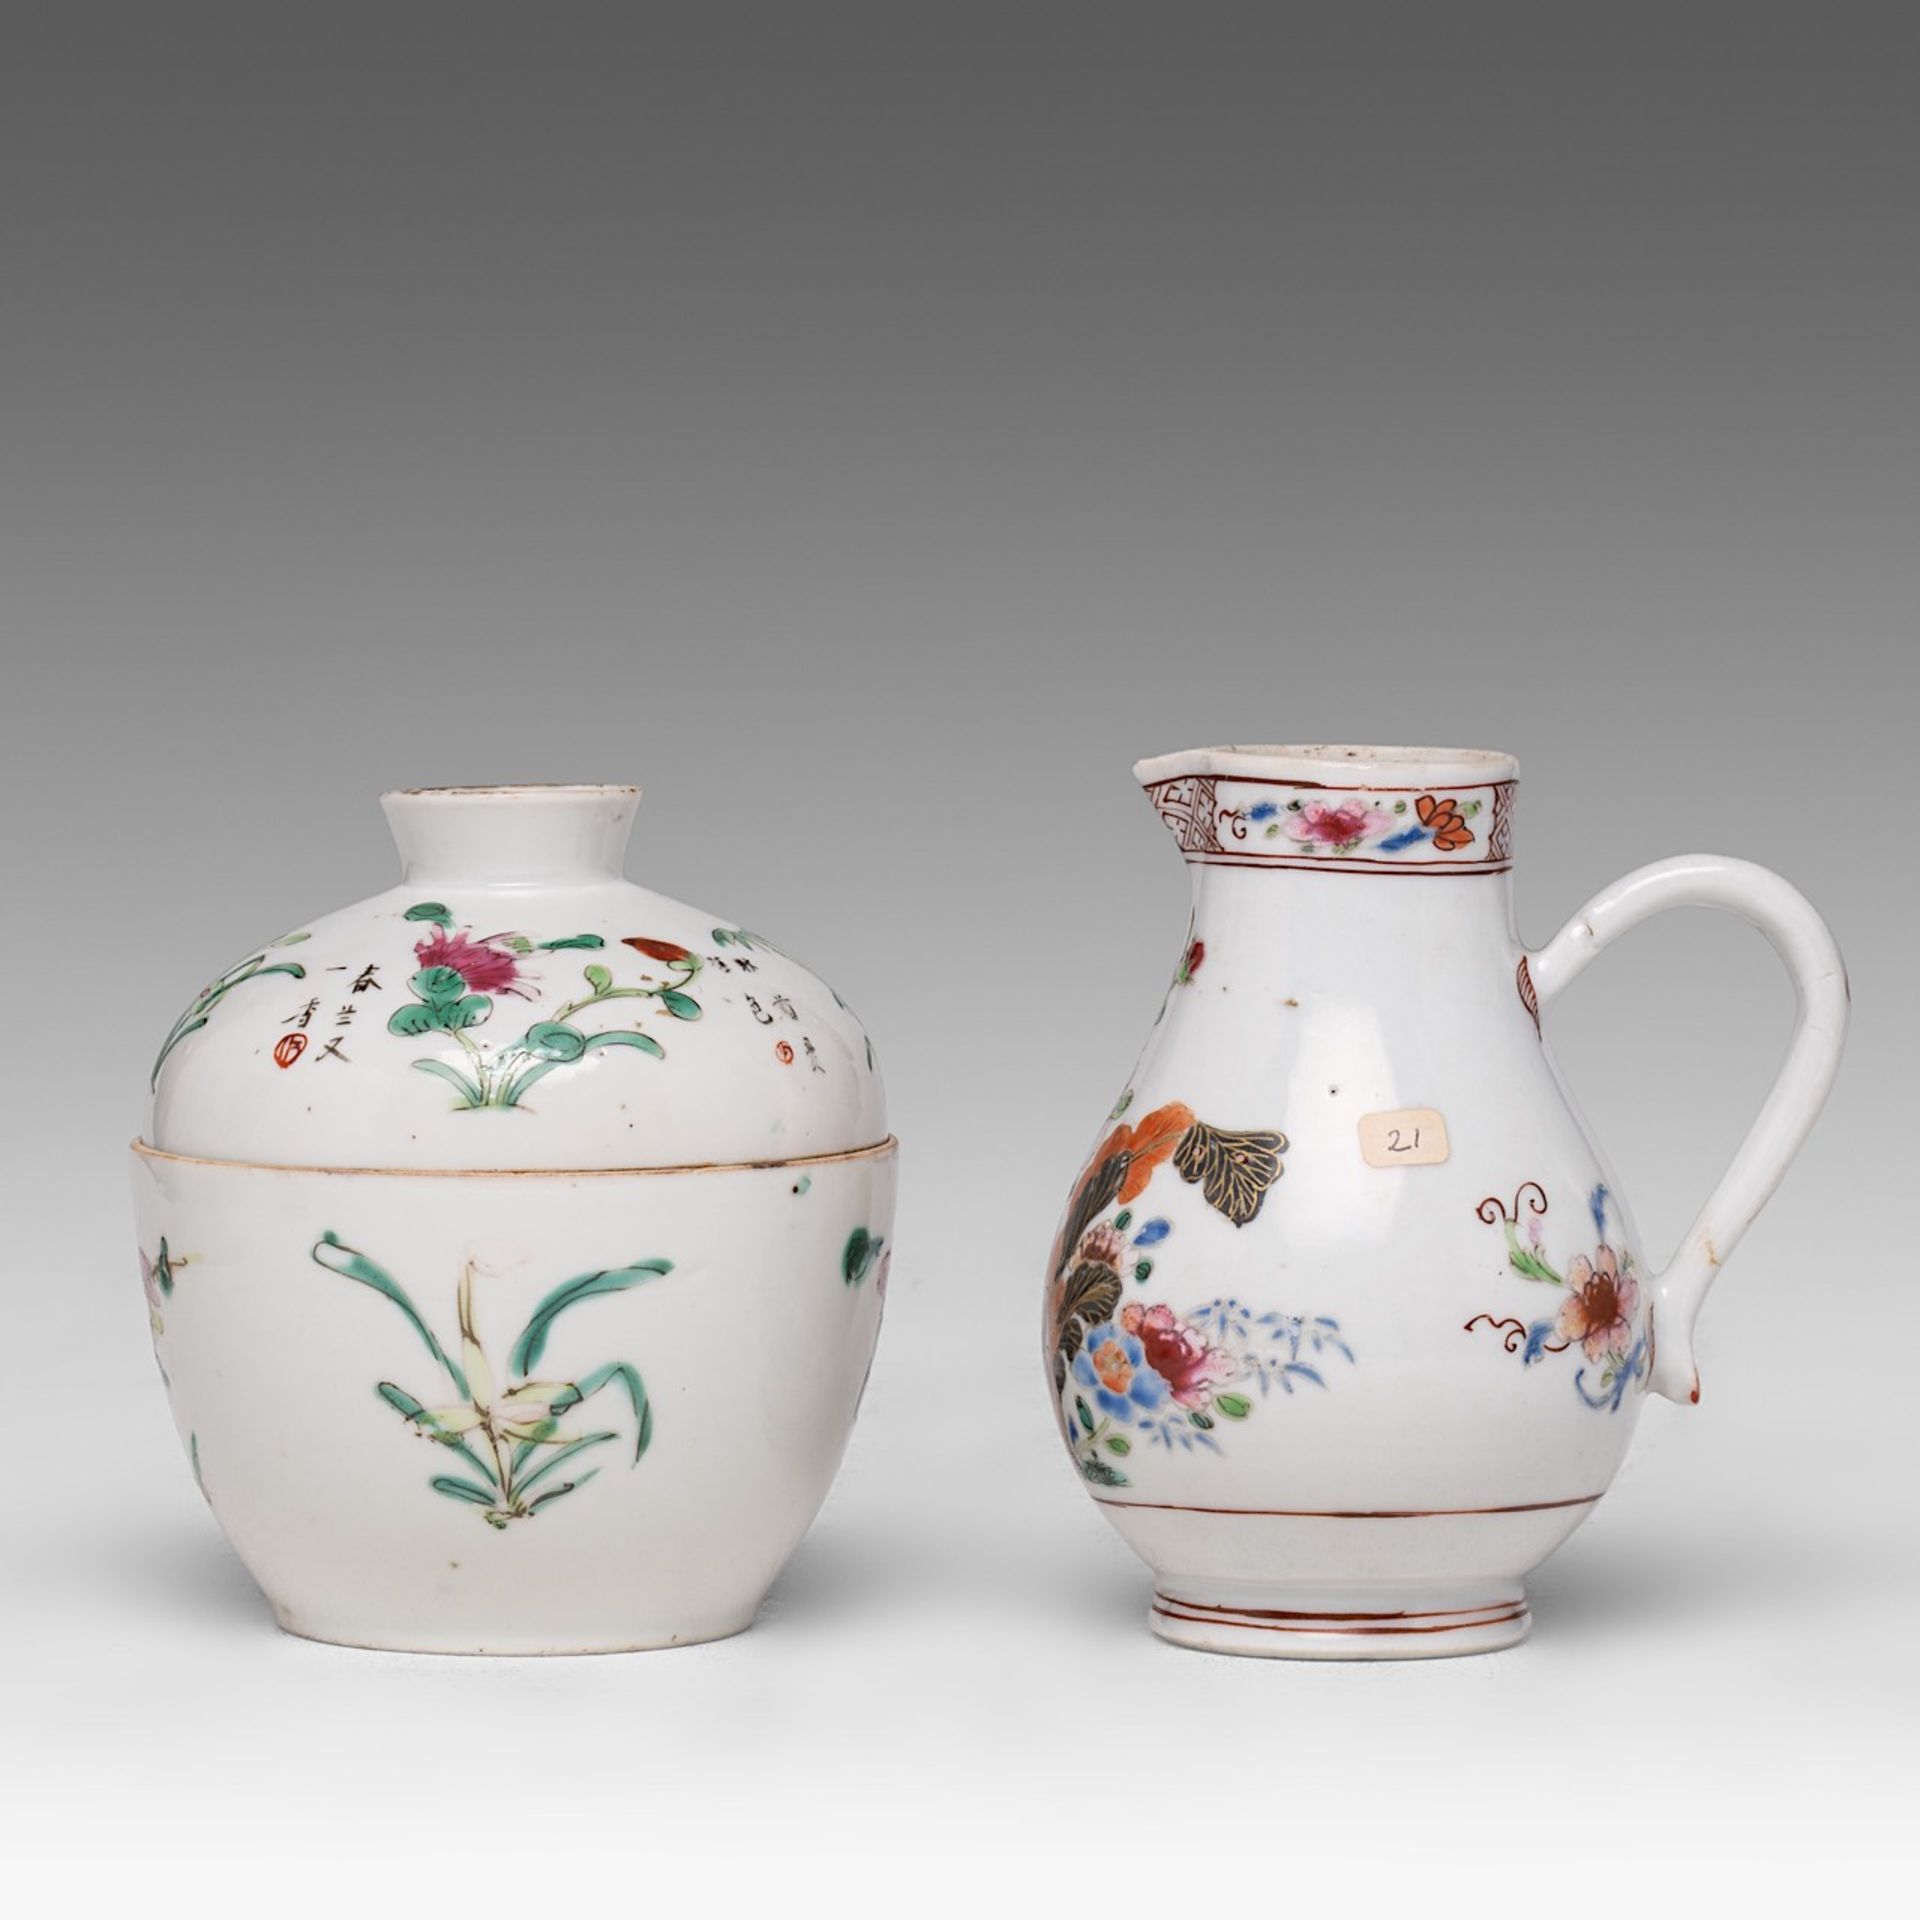 A collection of four Chinese scholar's objects, incl. a brush pot with inscriptions, late 18thC - ad - Image 7 of 29